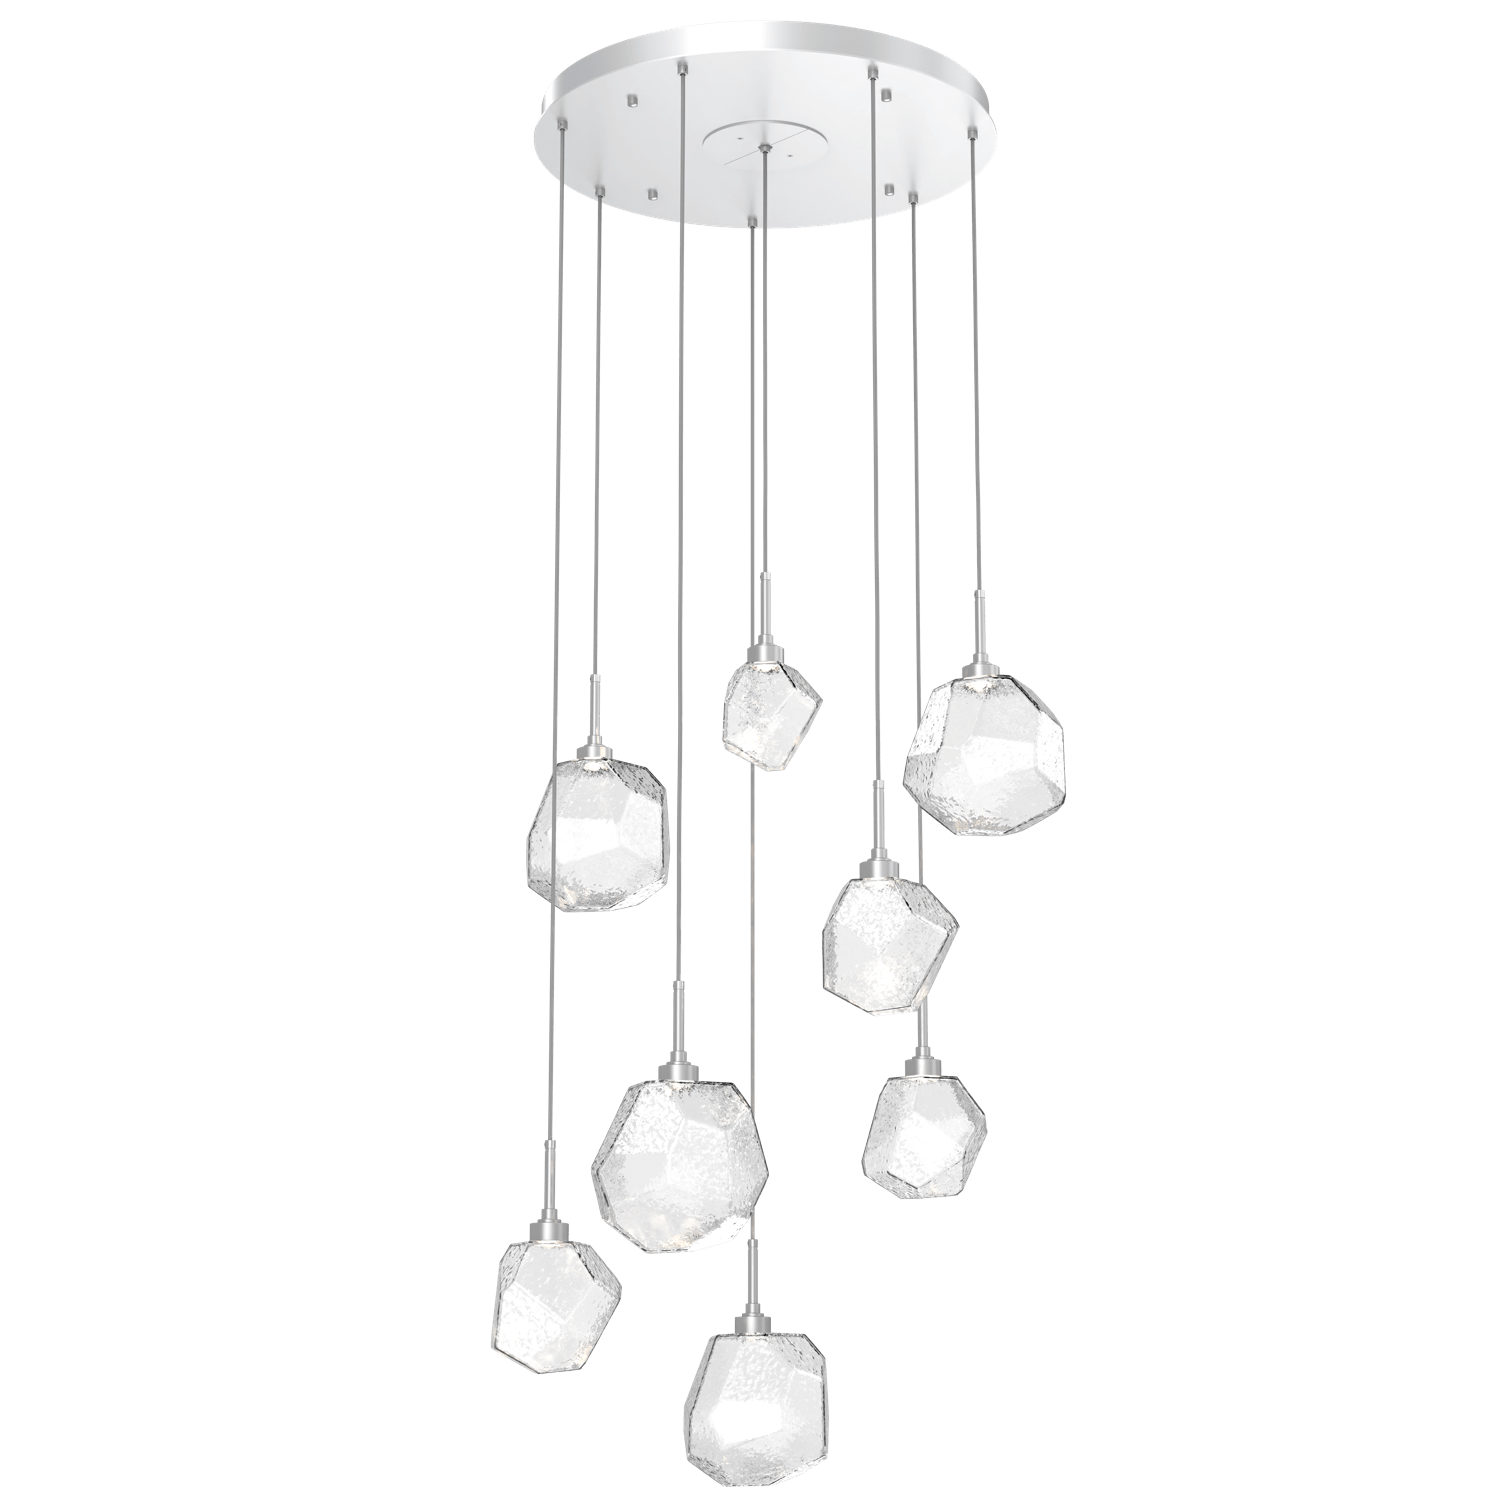 CHB0039-08-CS-C-Hammerton-Studio-Gem-8-light-round-pendant-chandelier-with-classic-silver-finish-and-clear-blown-glass-shades-and-LED-lamping